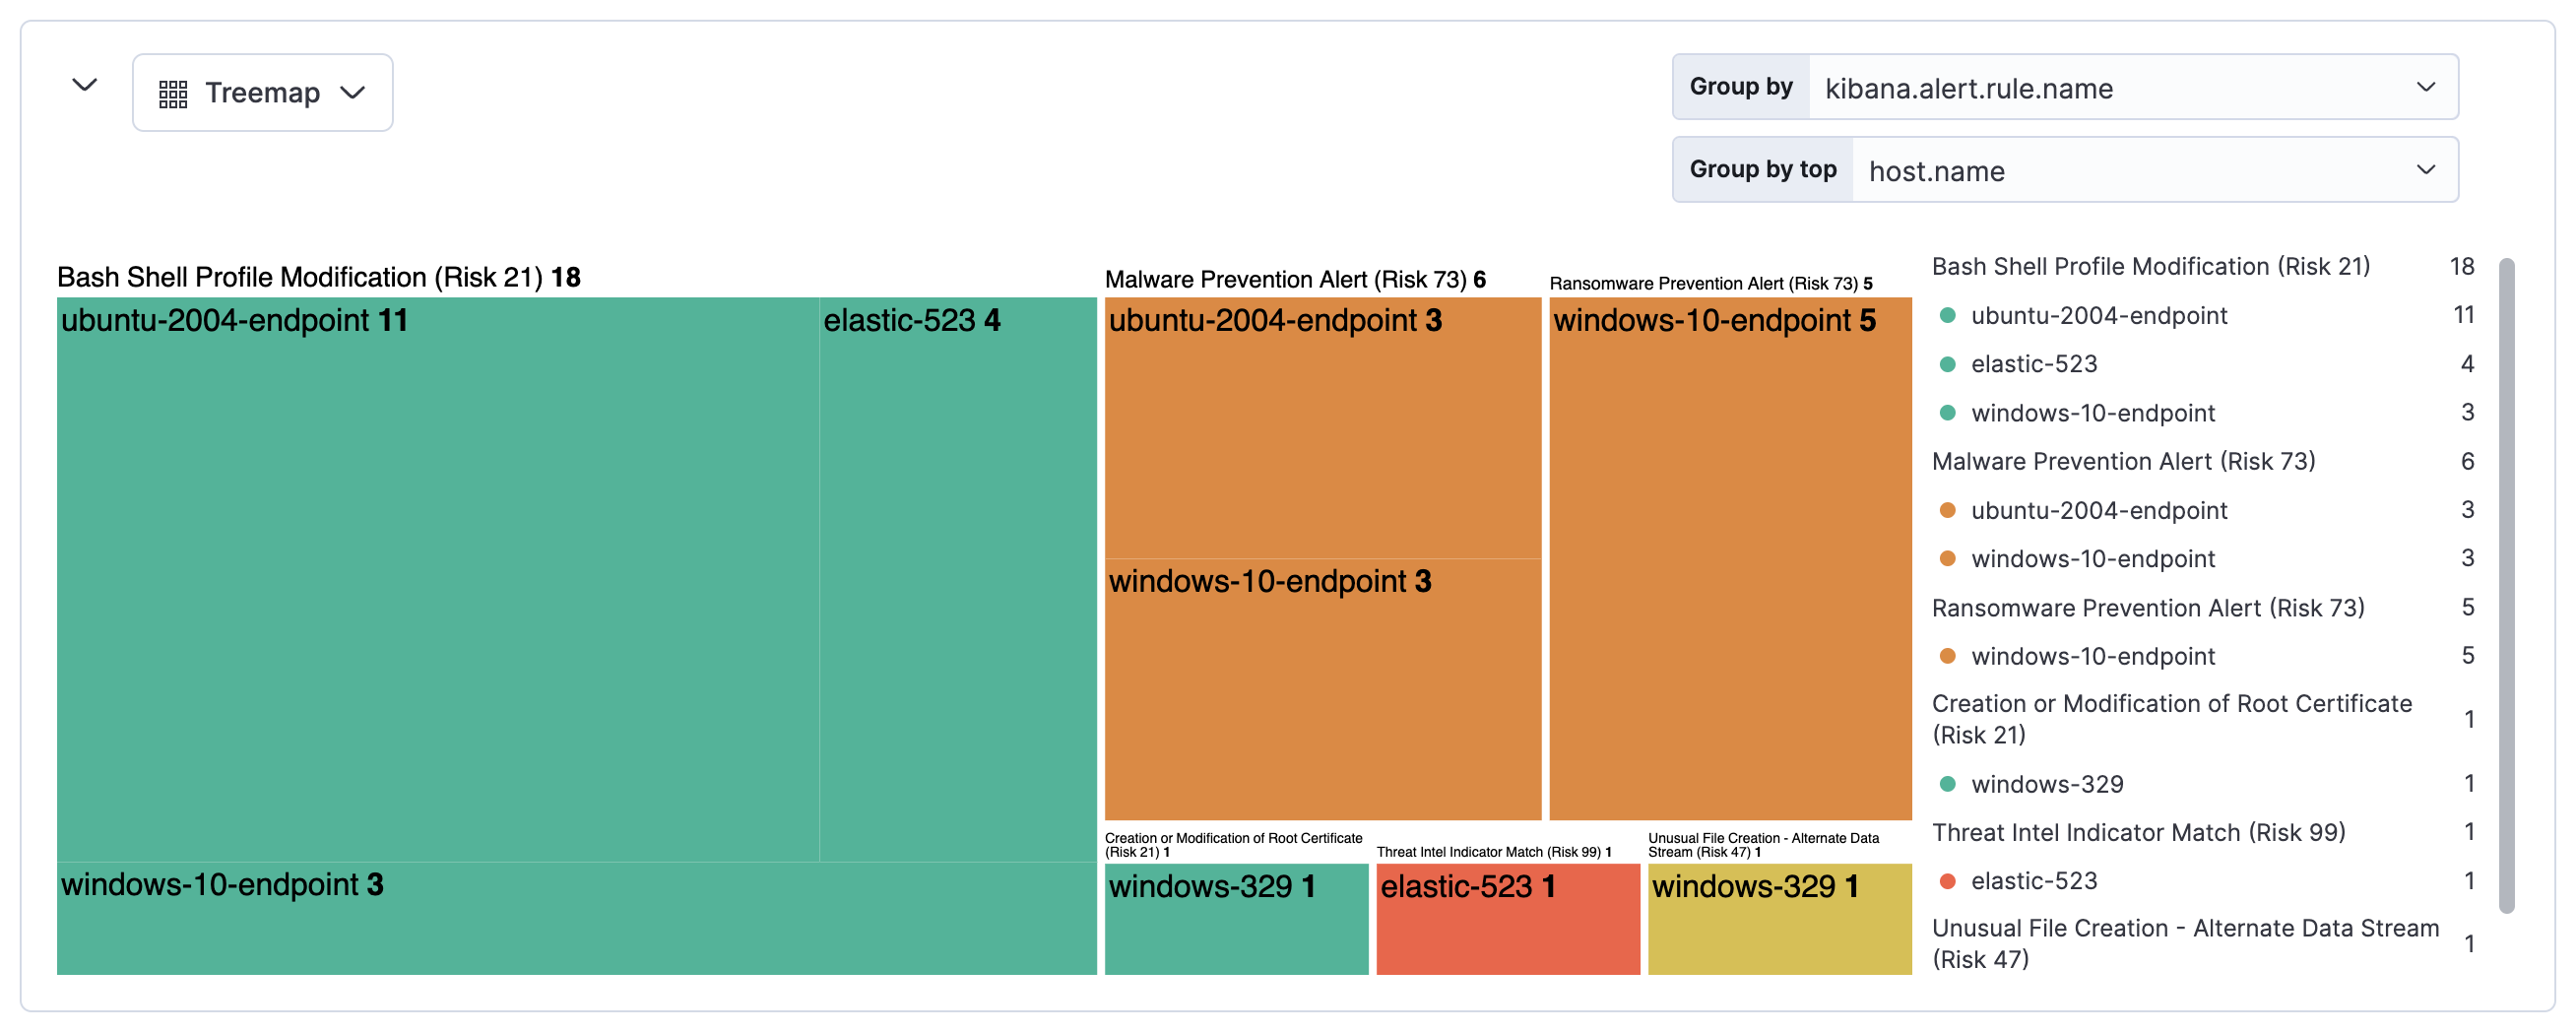 Treemap visualization for alerts